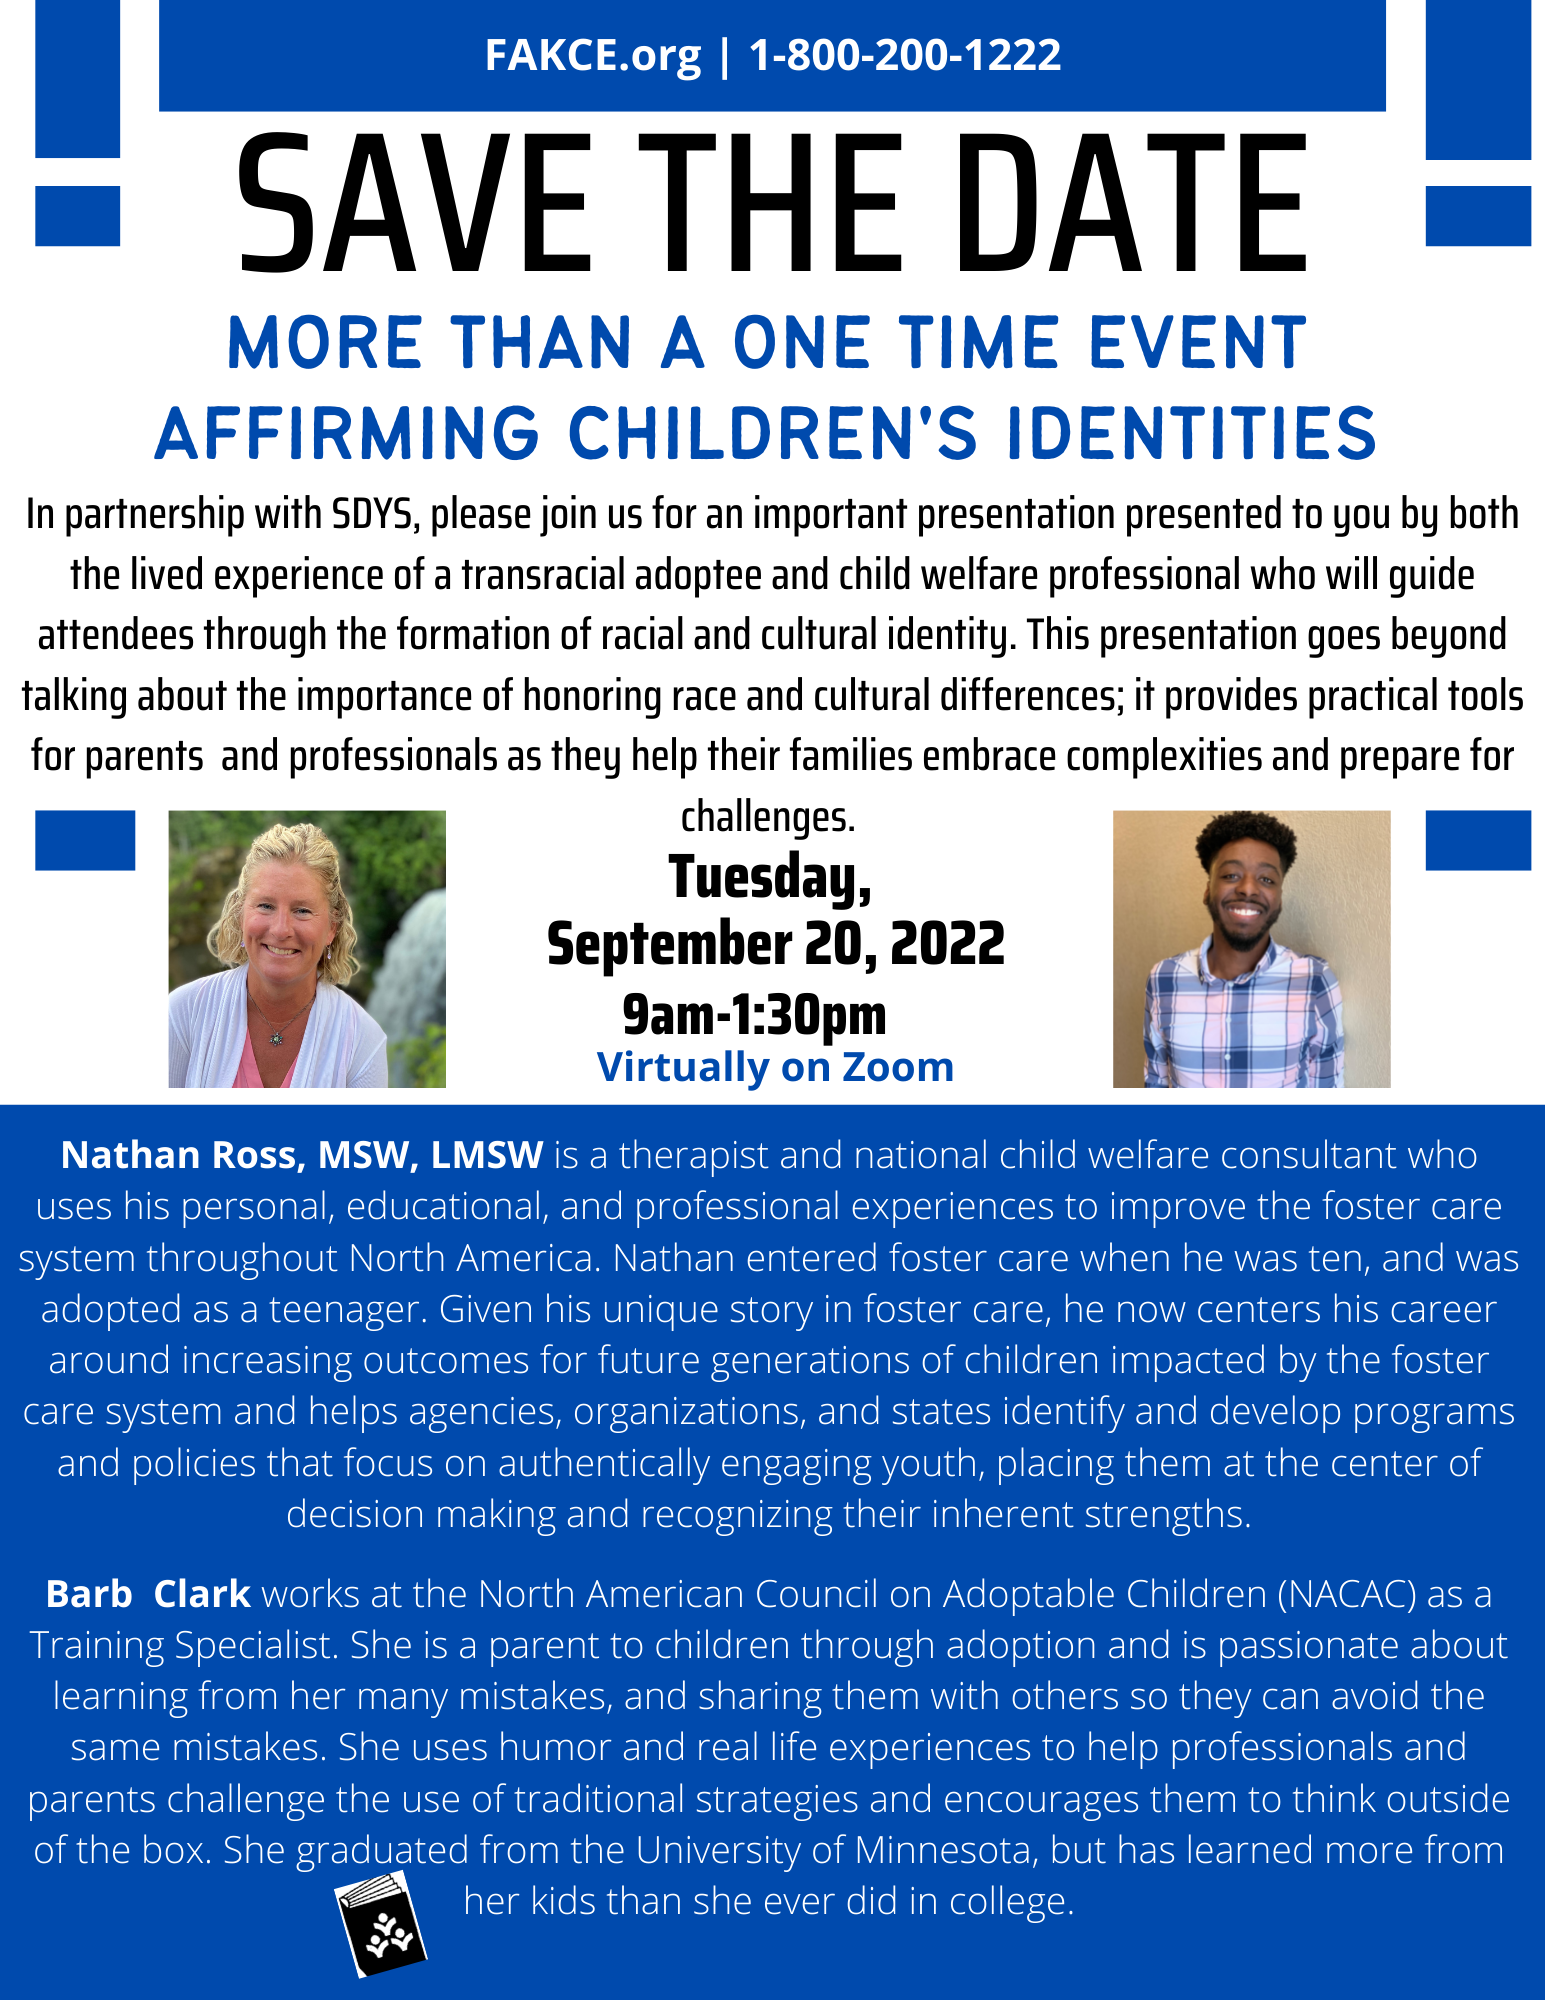 Online | More Than a One Time Event - Affirming Children's Identities